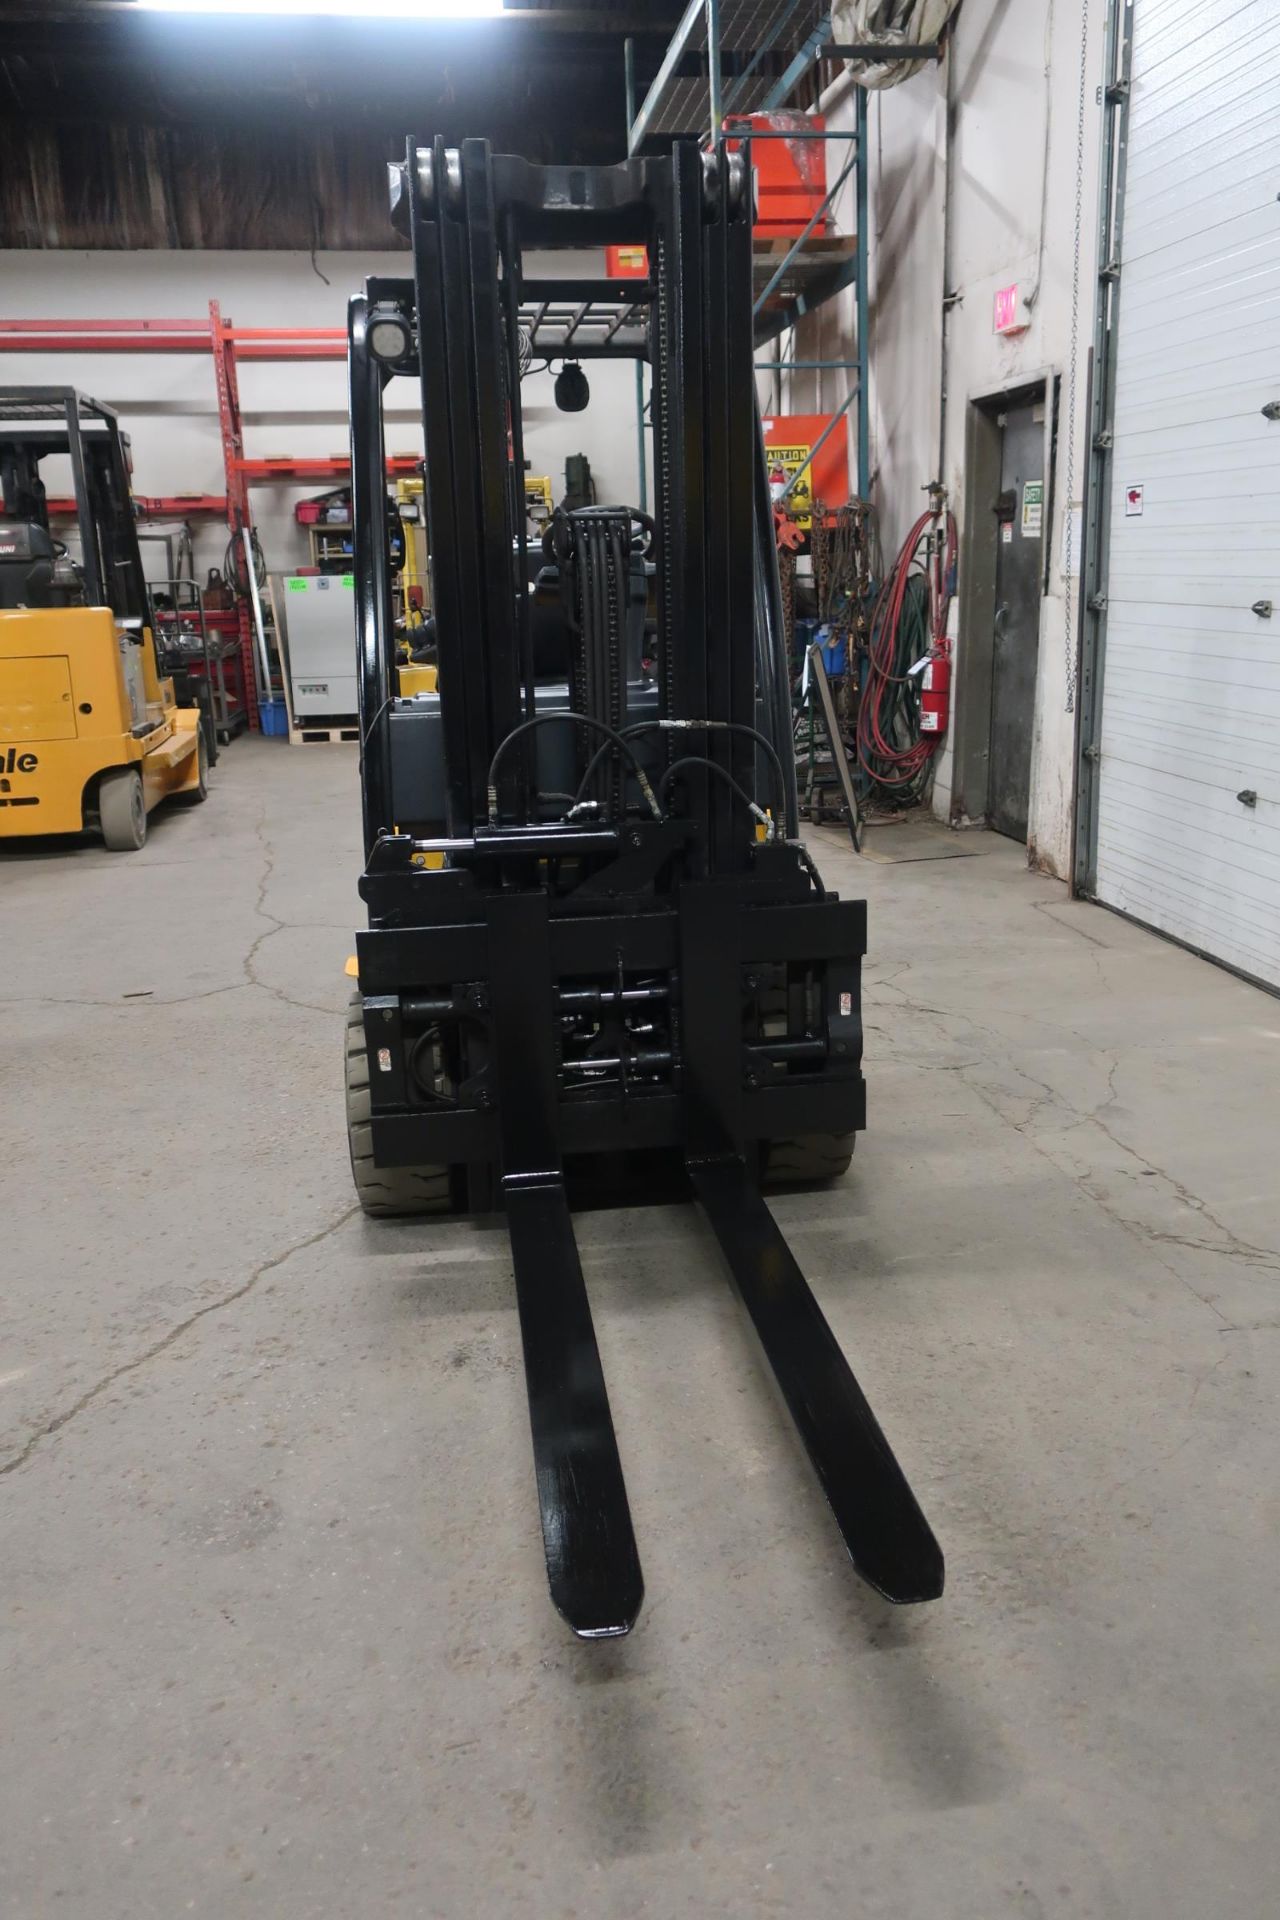 FREE CUSTOMS - 2018 Yale 7000lbs capacity LPG (propane) Forklift with 3-stage with sideshift - Image 2 of 2